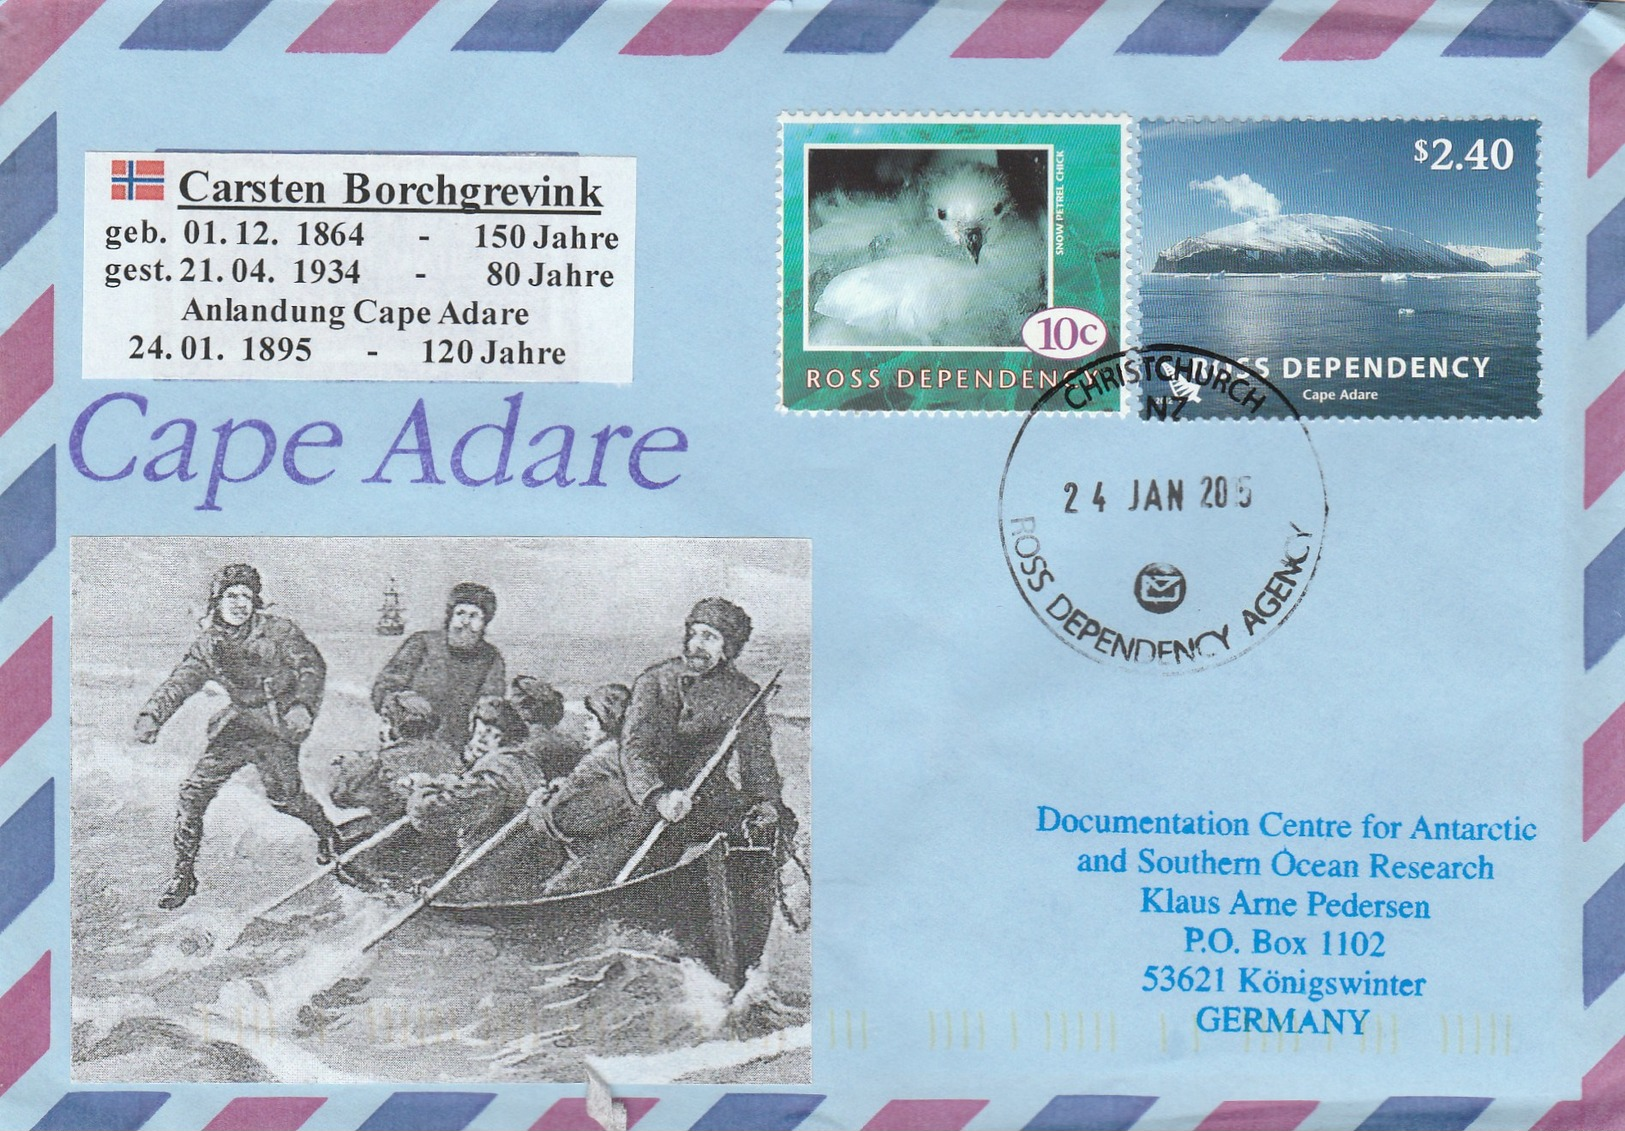 Cover Posted By Ross DeoendencyAgency24 Jan 2015 With Label"Carsten Borchgrevink"first Step At  "Cape Adare" - Explorateurs & Célébrités Polaires